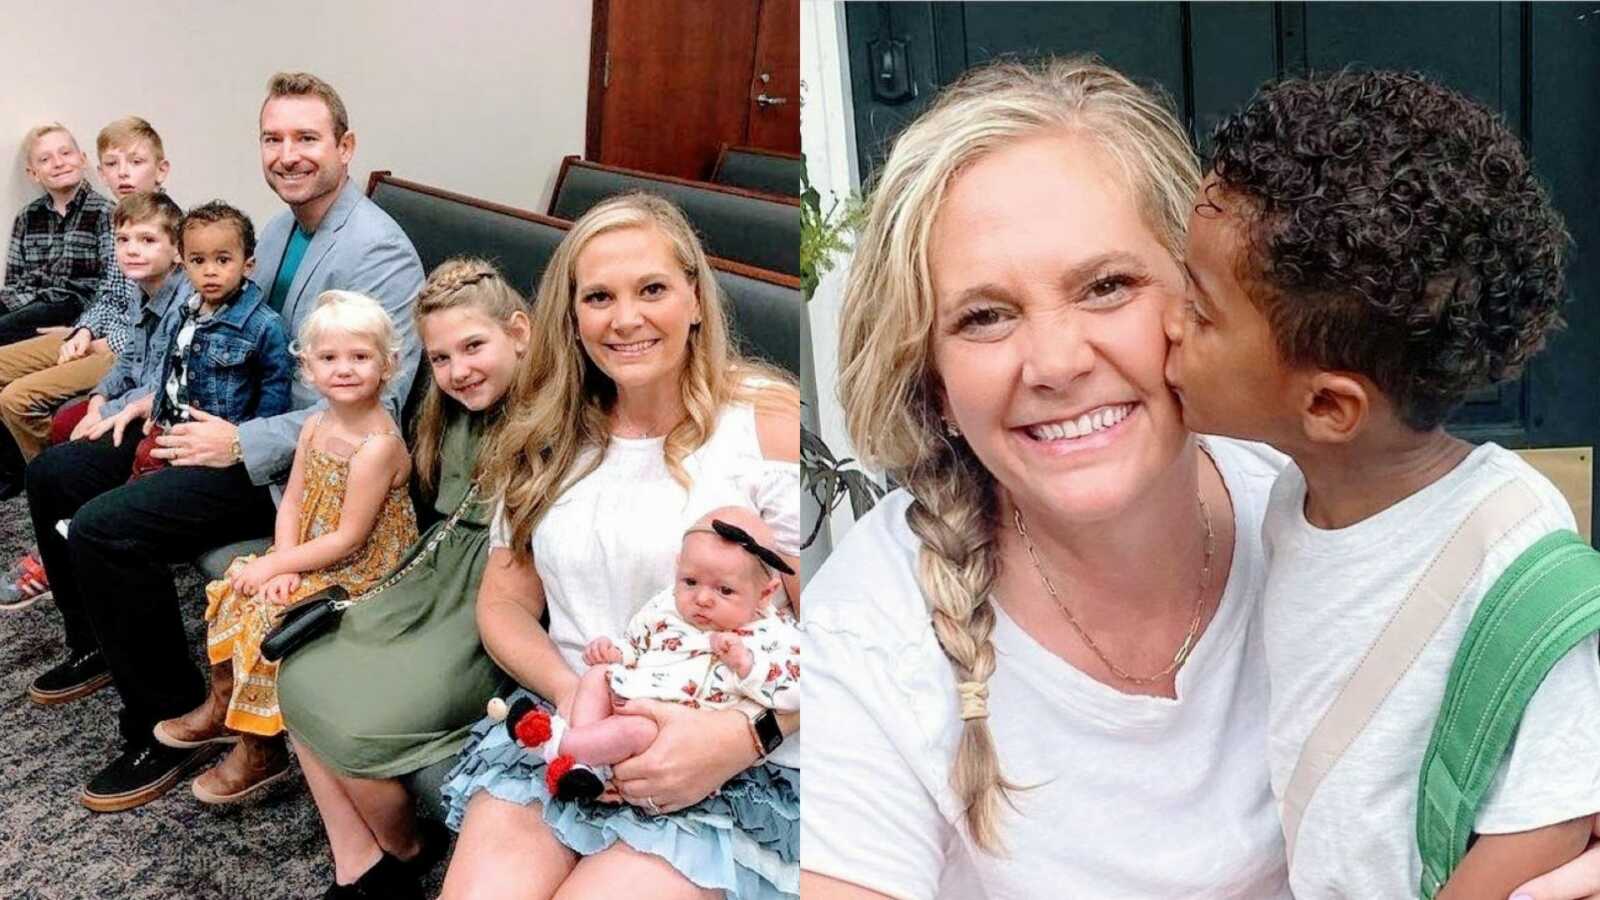 On the left, family of seven take a photo together in a courtroom, on the right, adopted son kisses his mom on the cheek